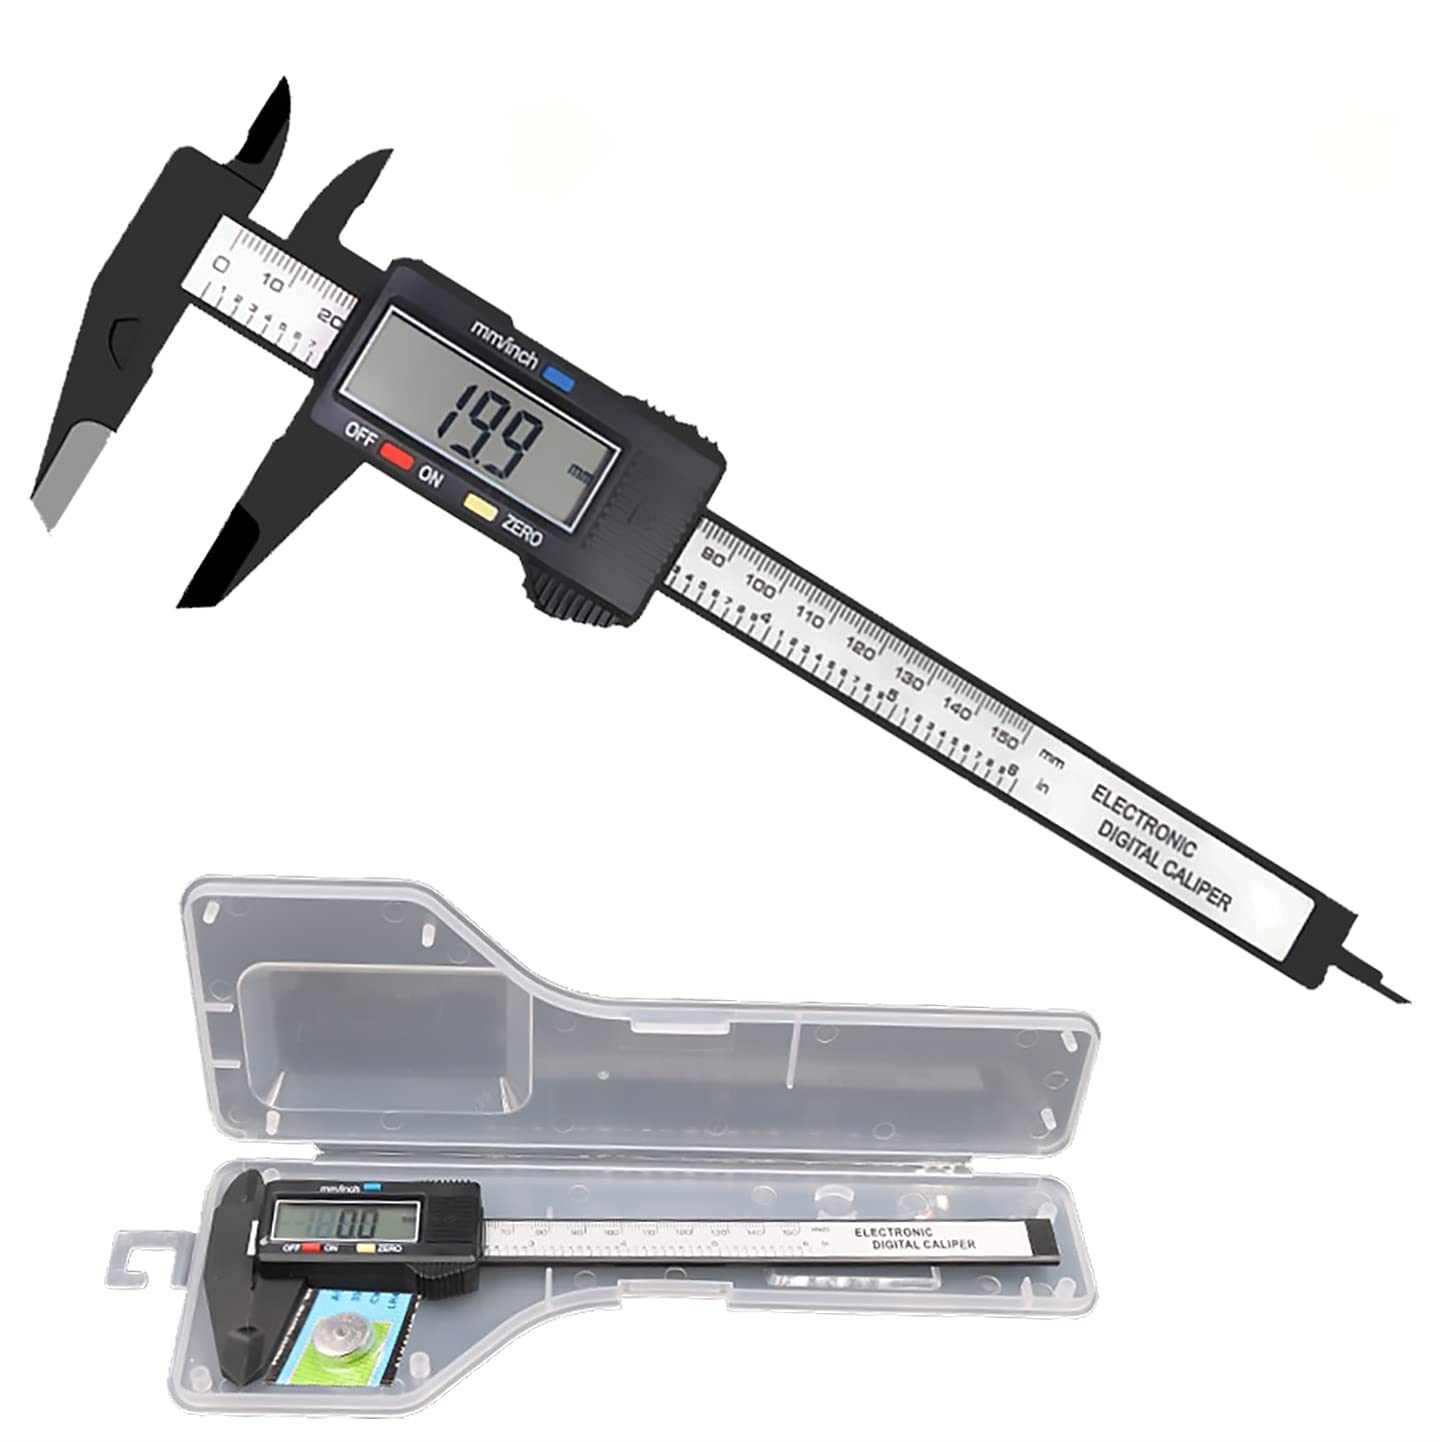 Simhevn Electronic Digital Caliper, LCD | 0 to 6 inch [...]